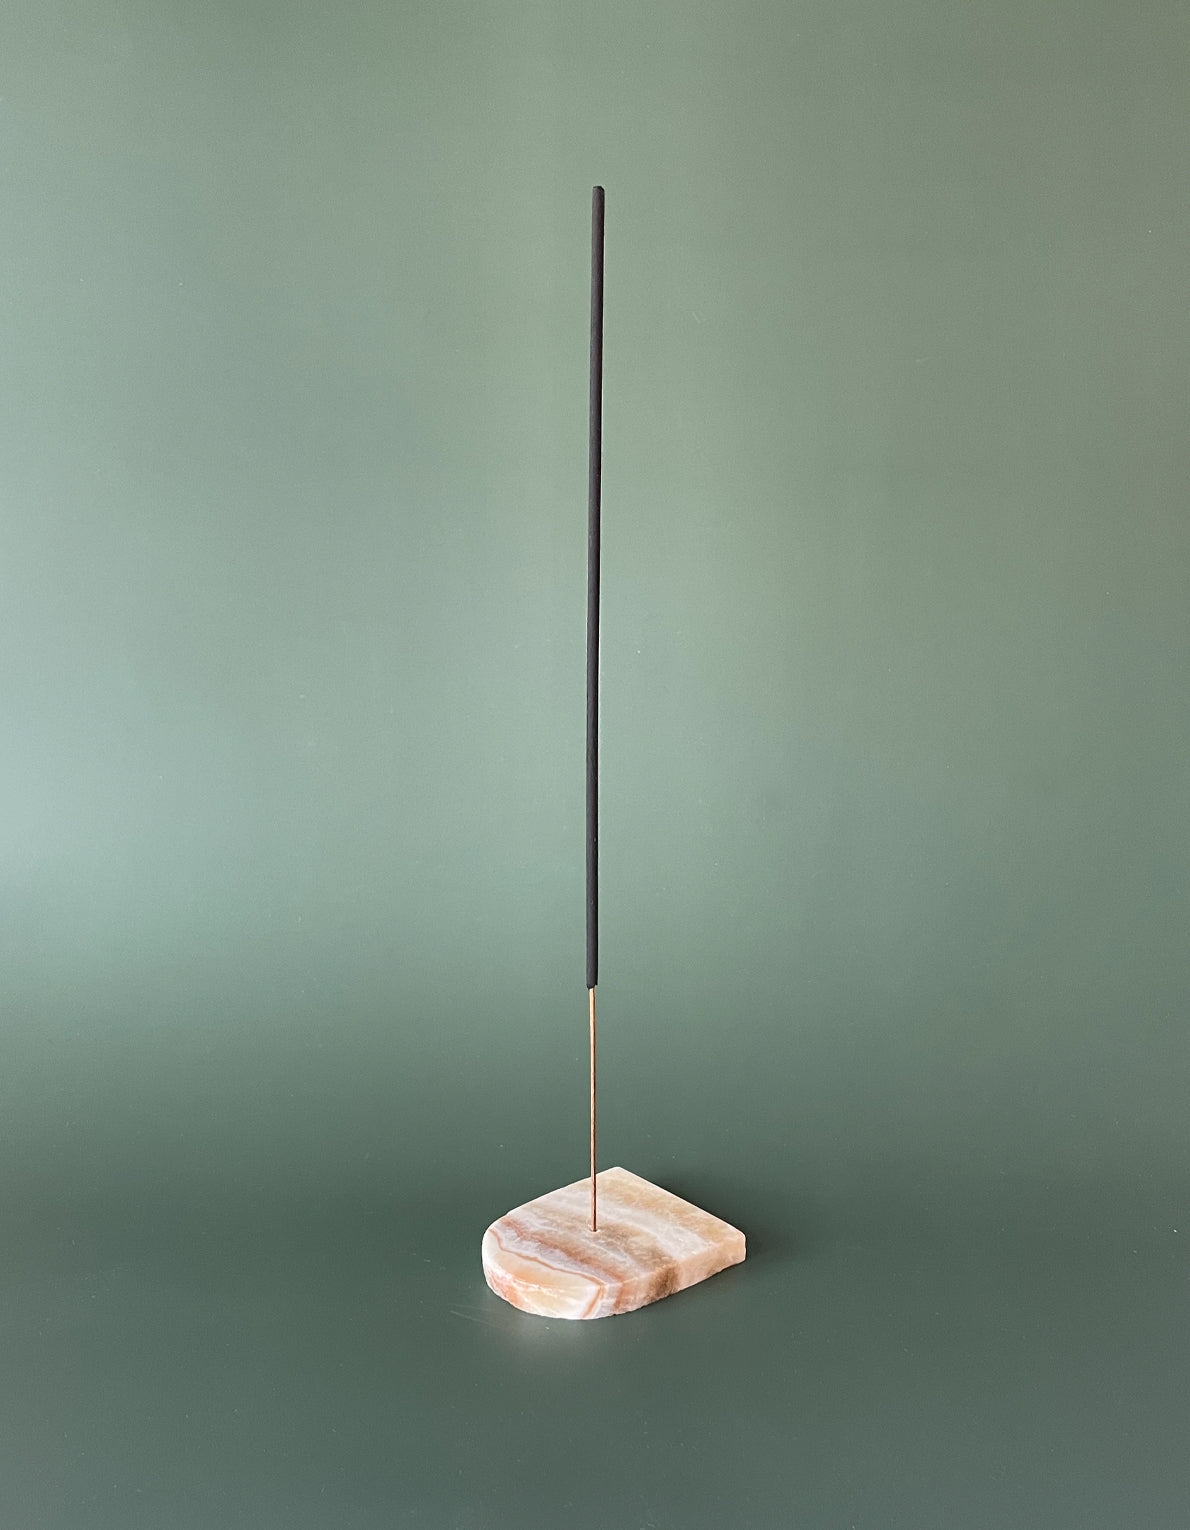 Botanica's incense holders are hand-carved from natural stone by Peruvian artisans, and certified ethically hand-crafted by NEST. No two are exactly alike–color and veining differences will be apparent on each unique piece.Available in soapstone or creamy onyx.